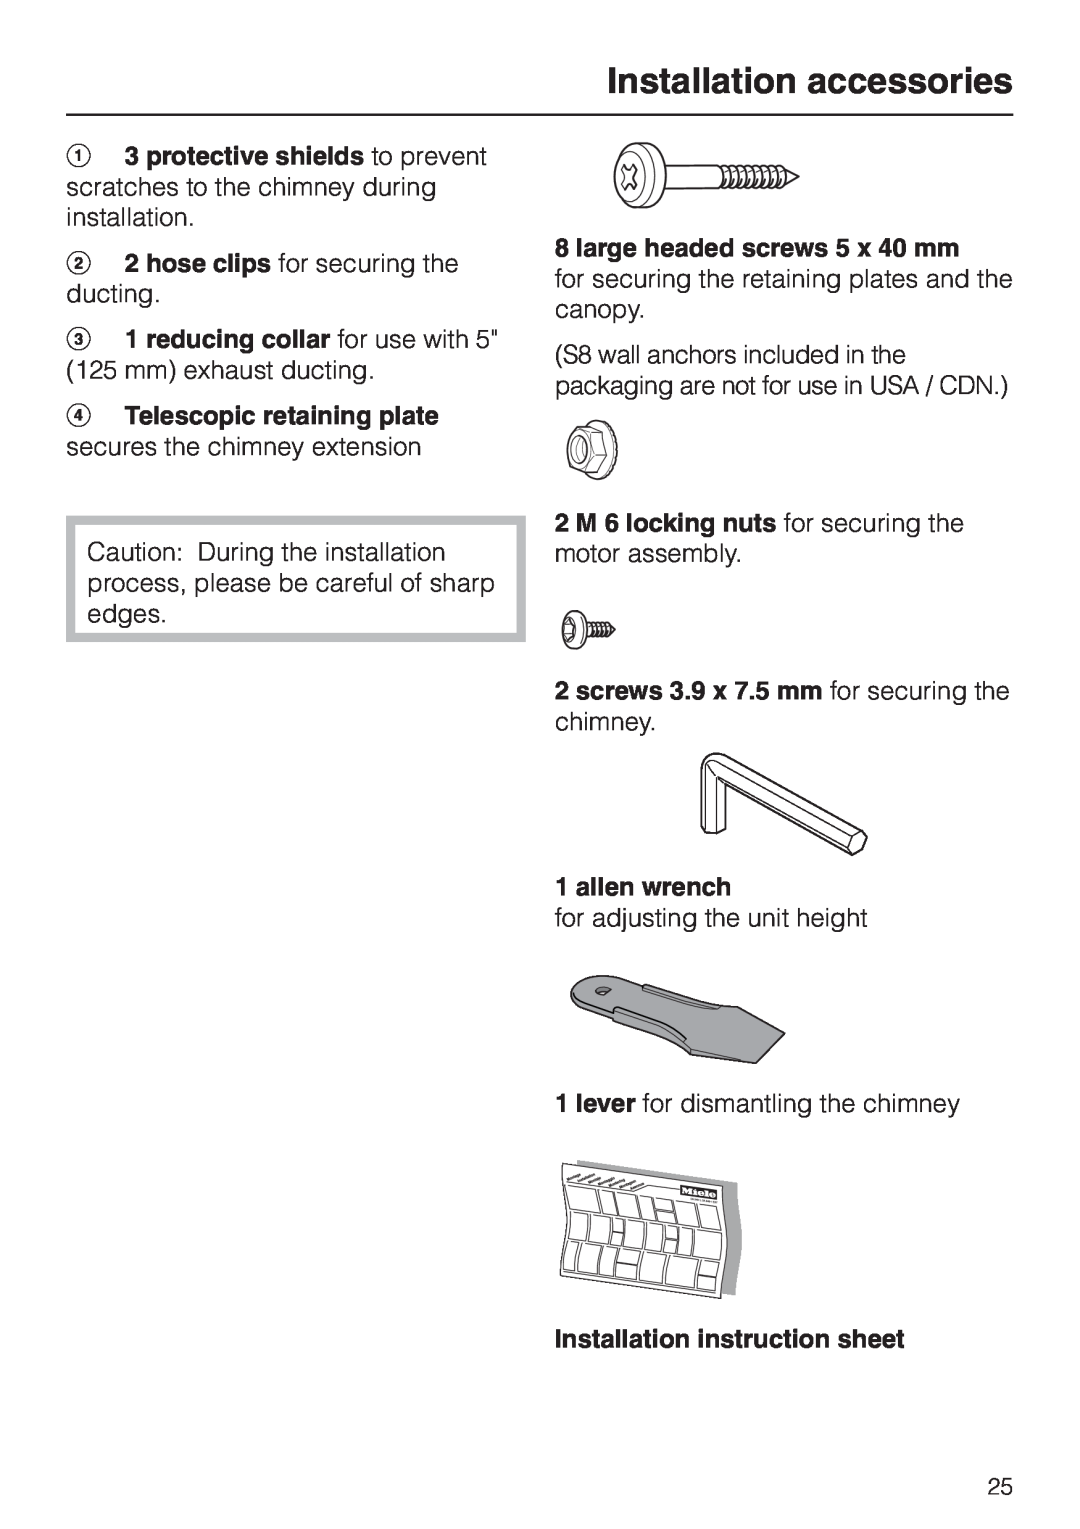 Miele DA 402 installation instructions Installation accessories, c1 reducing collar for use with 